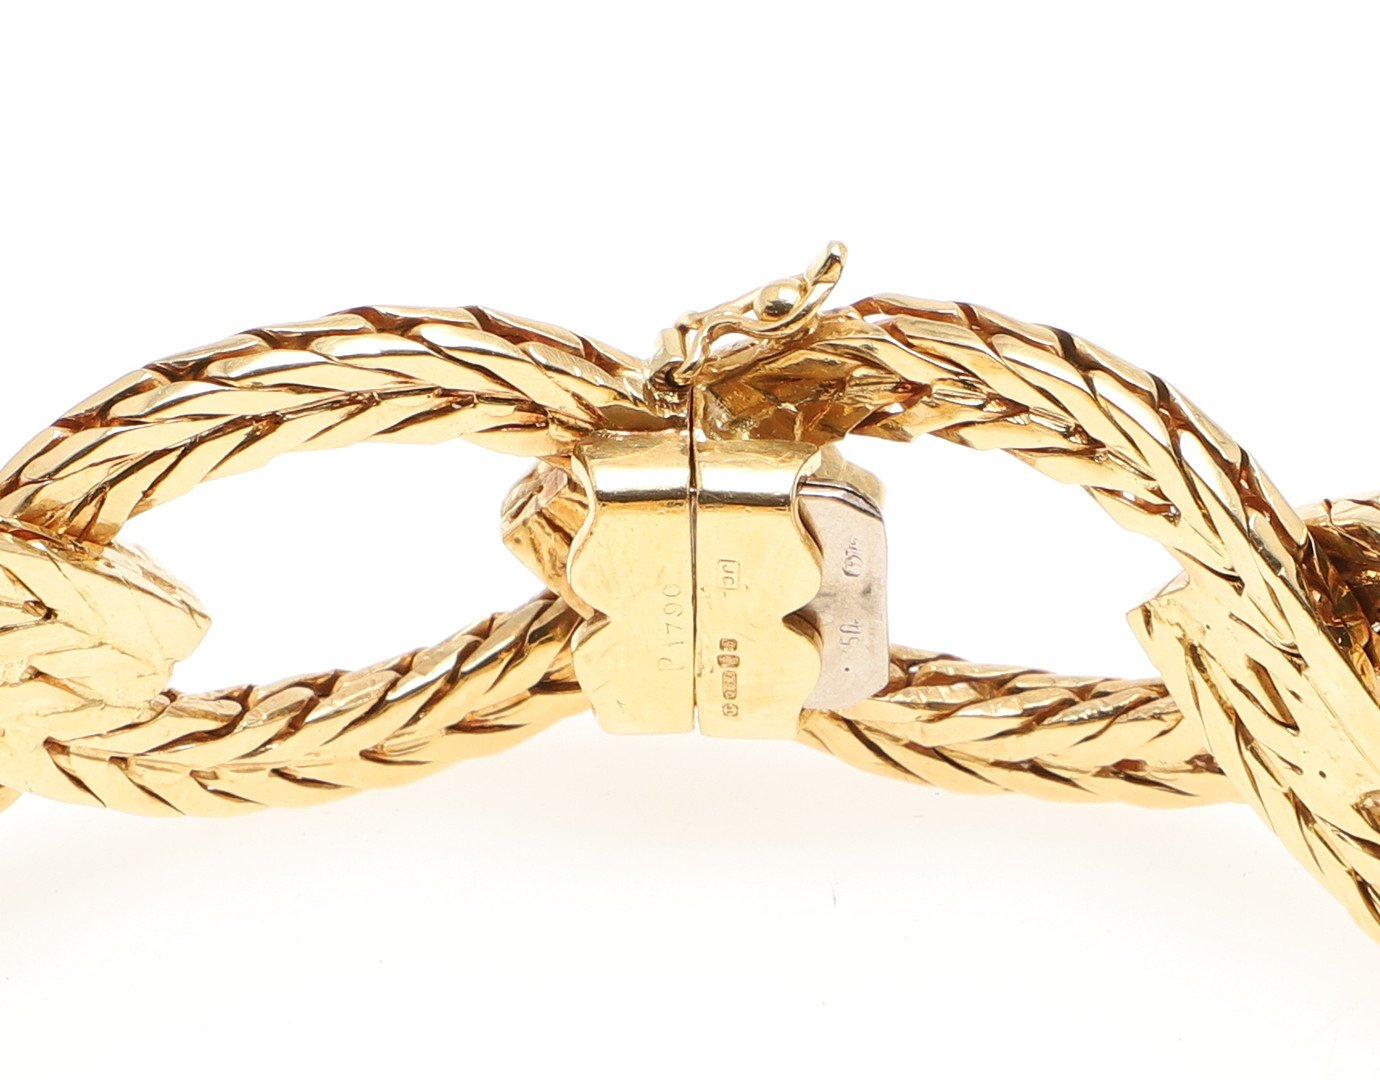 AN 18CT GOLD BRACELET BY CARTIER. - Image 4 of 7